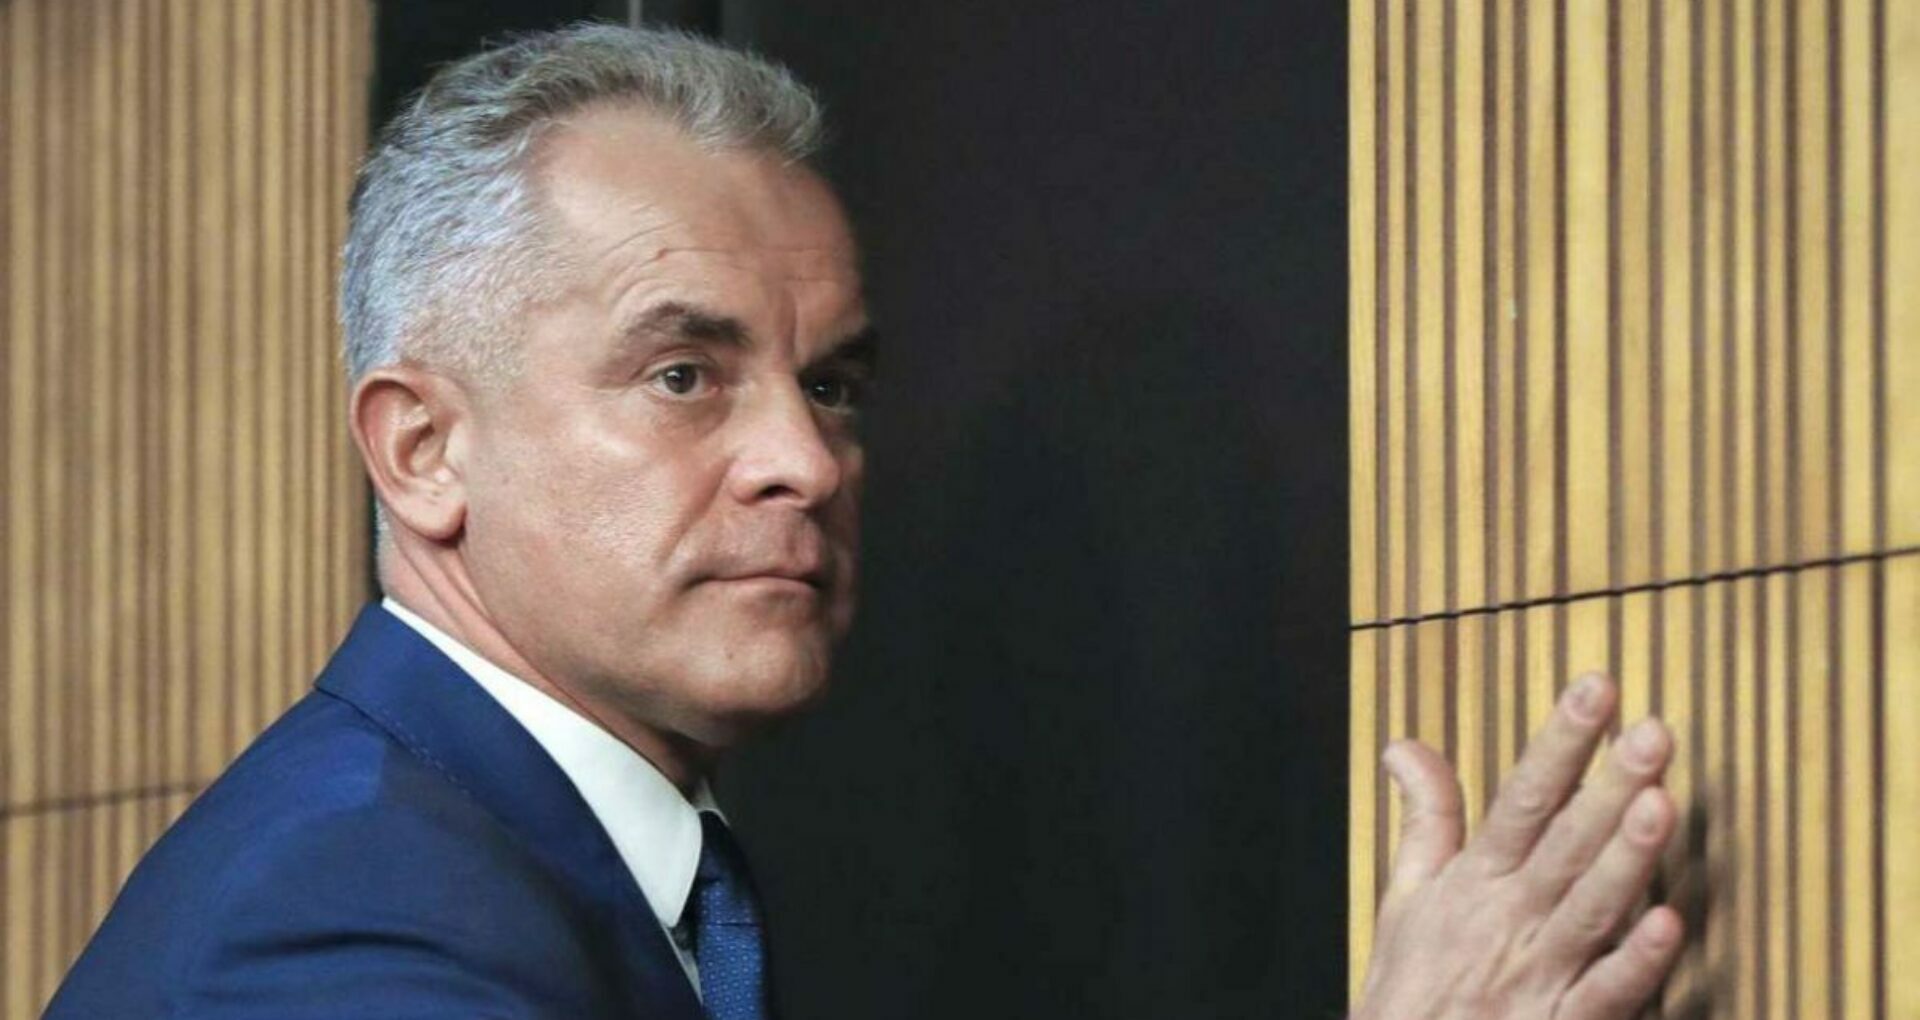 The U.S. Embassy in Moldova Confirms the Fugitive Vladimir Plahotniuc’s Departure From the United States